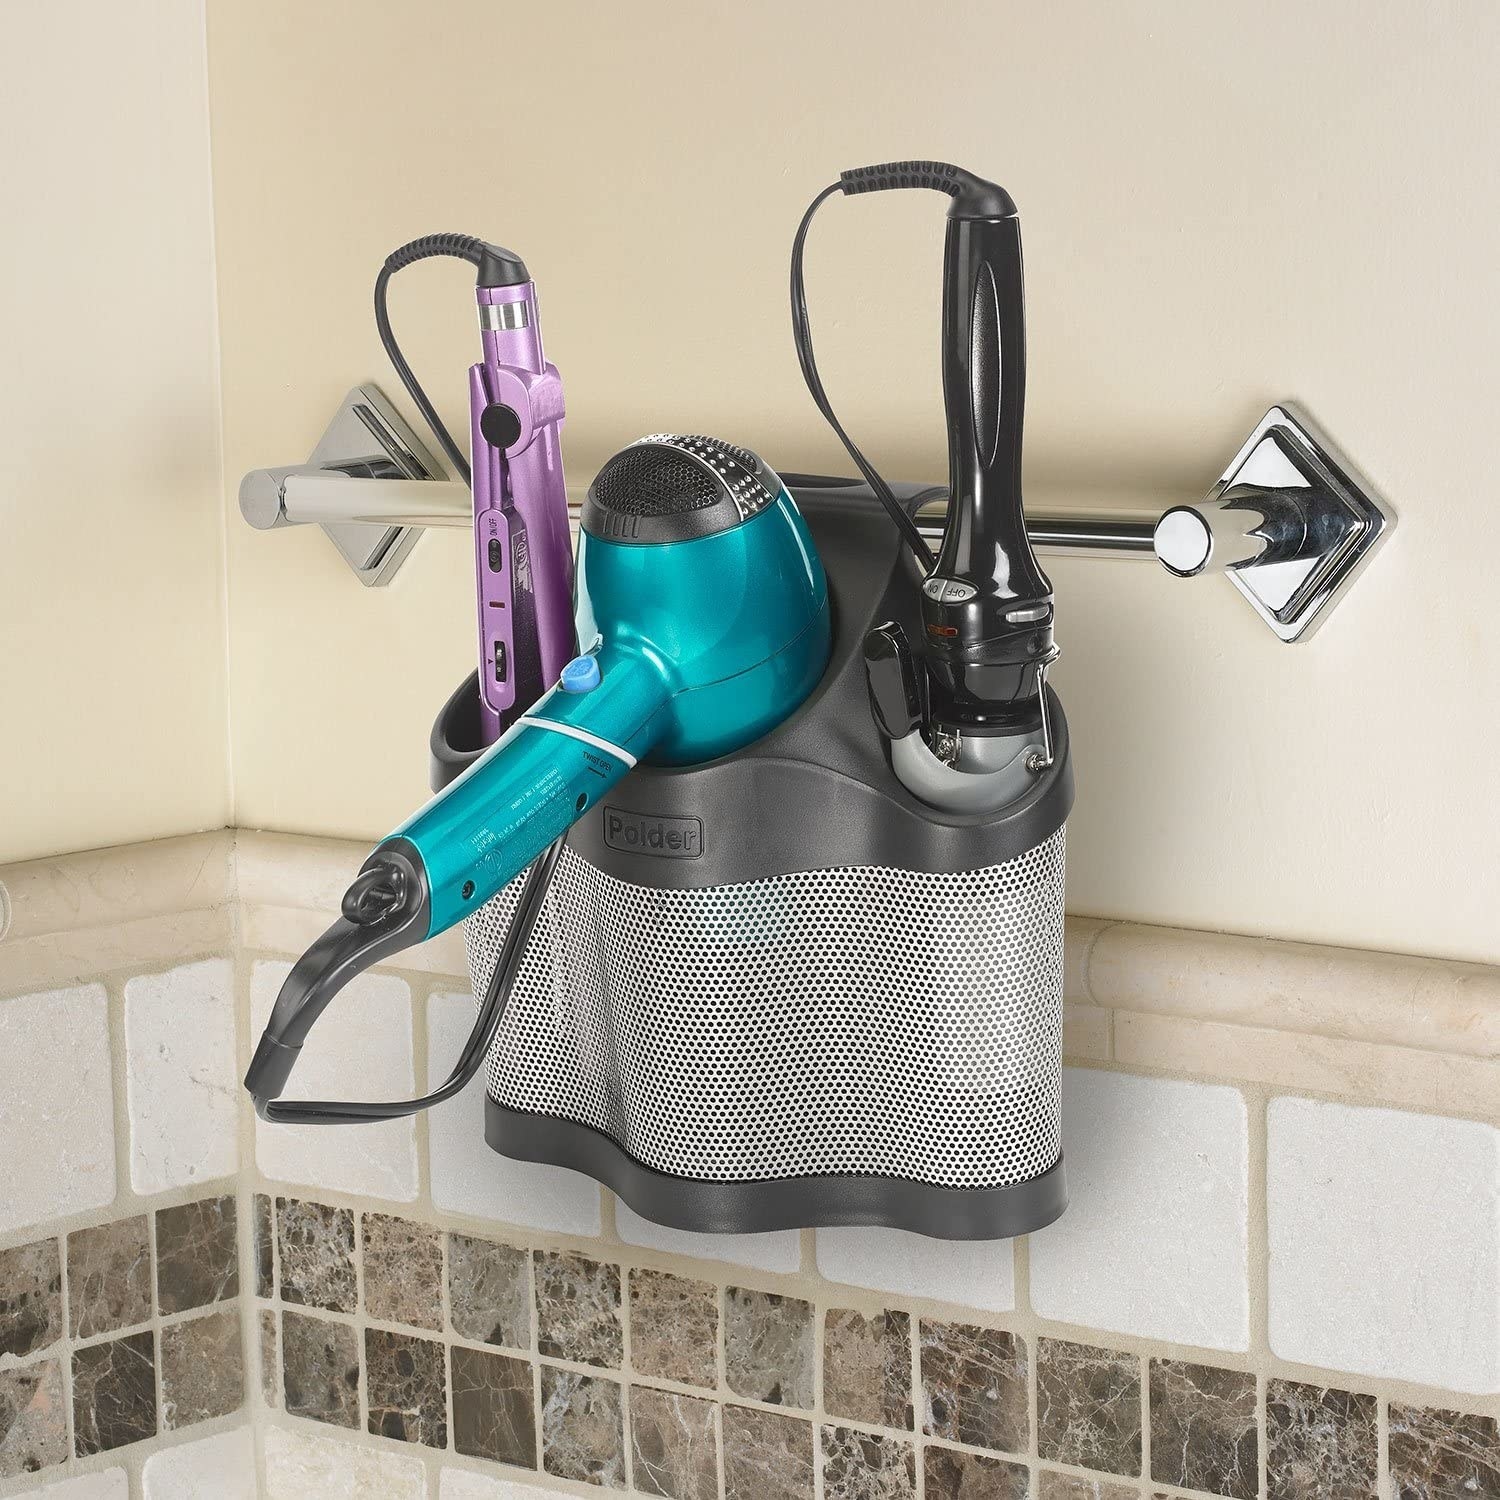 The styling station holding hair tools and hanging from a towel rack